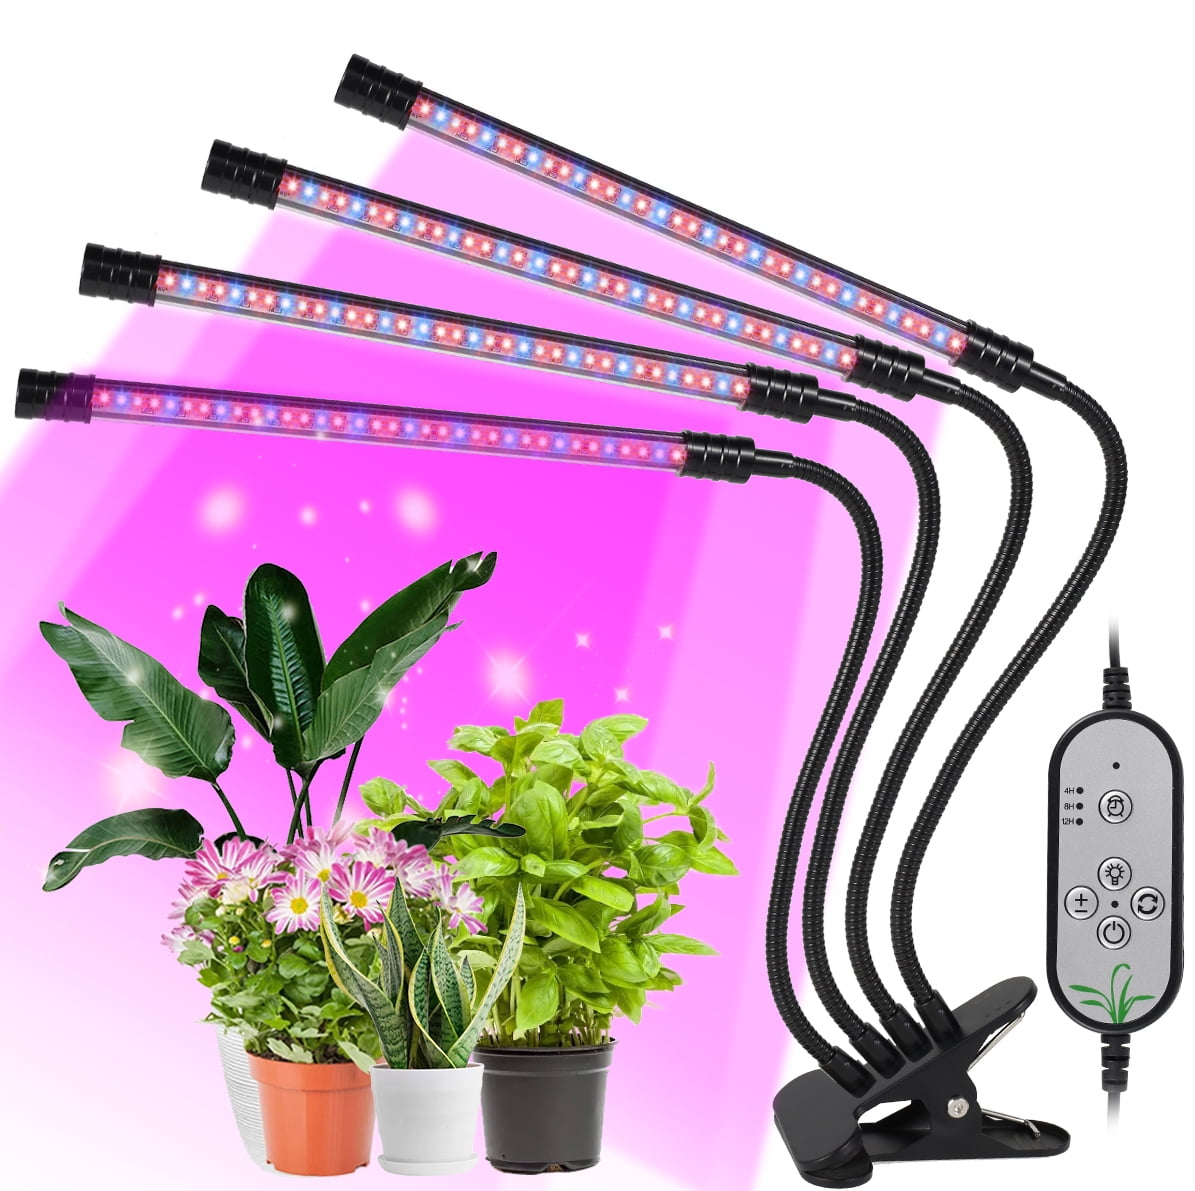 3 Heads Grow Light Plant Growing Lamp for Indoor Plants Hydroponics 180 LED 150W 